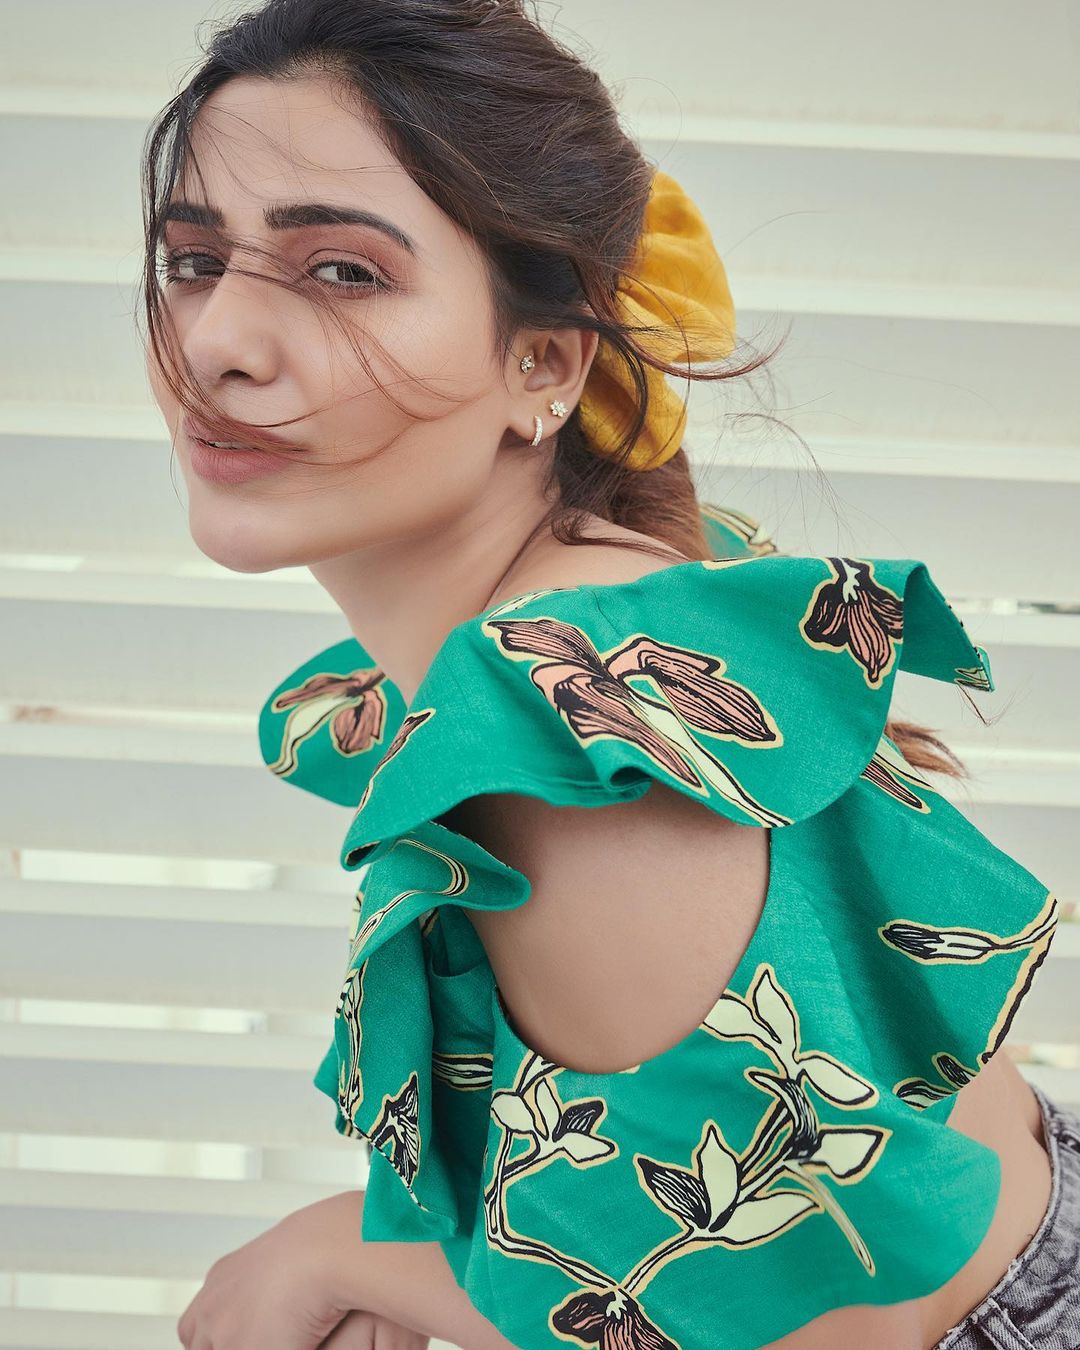 Samantha Akkineni And Anasuya Bharadwaj’s Hottest Outfits That You Should Have Your Eye On: Have A Look 3